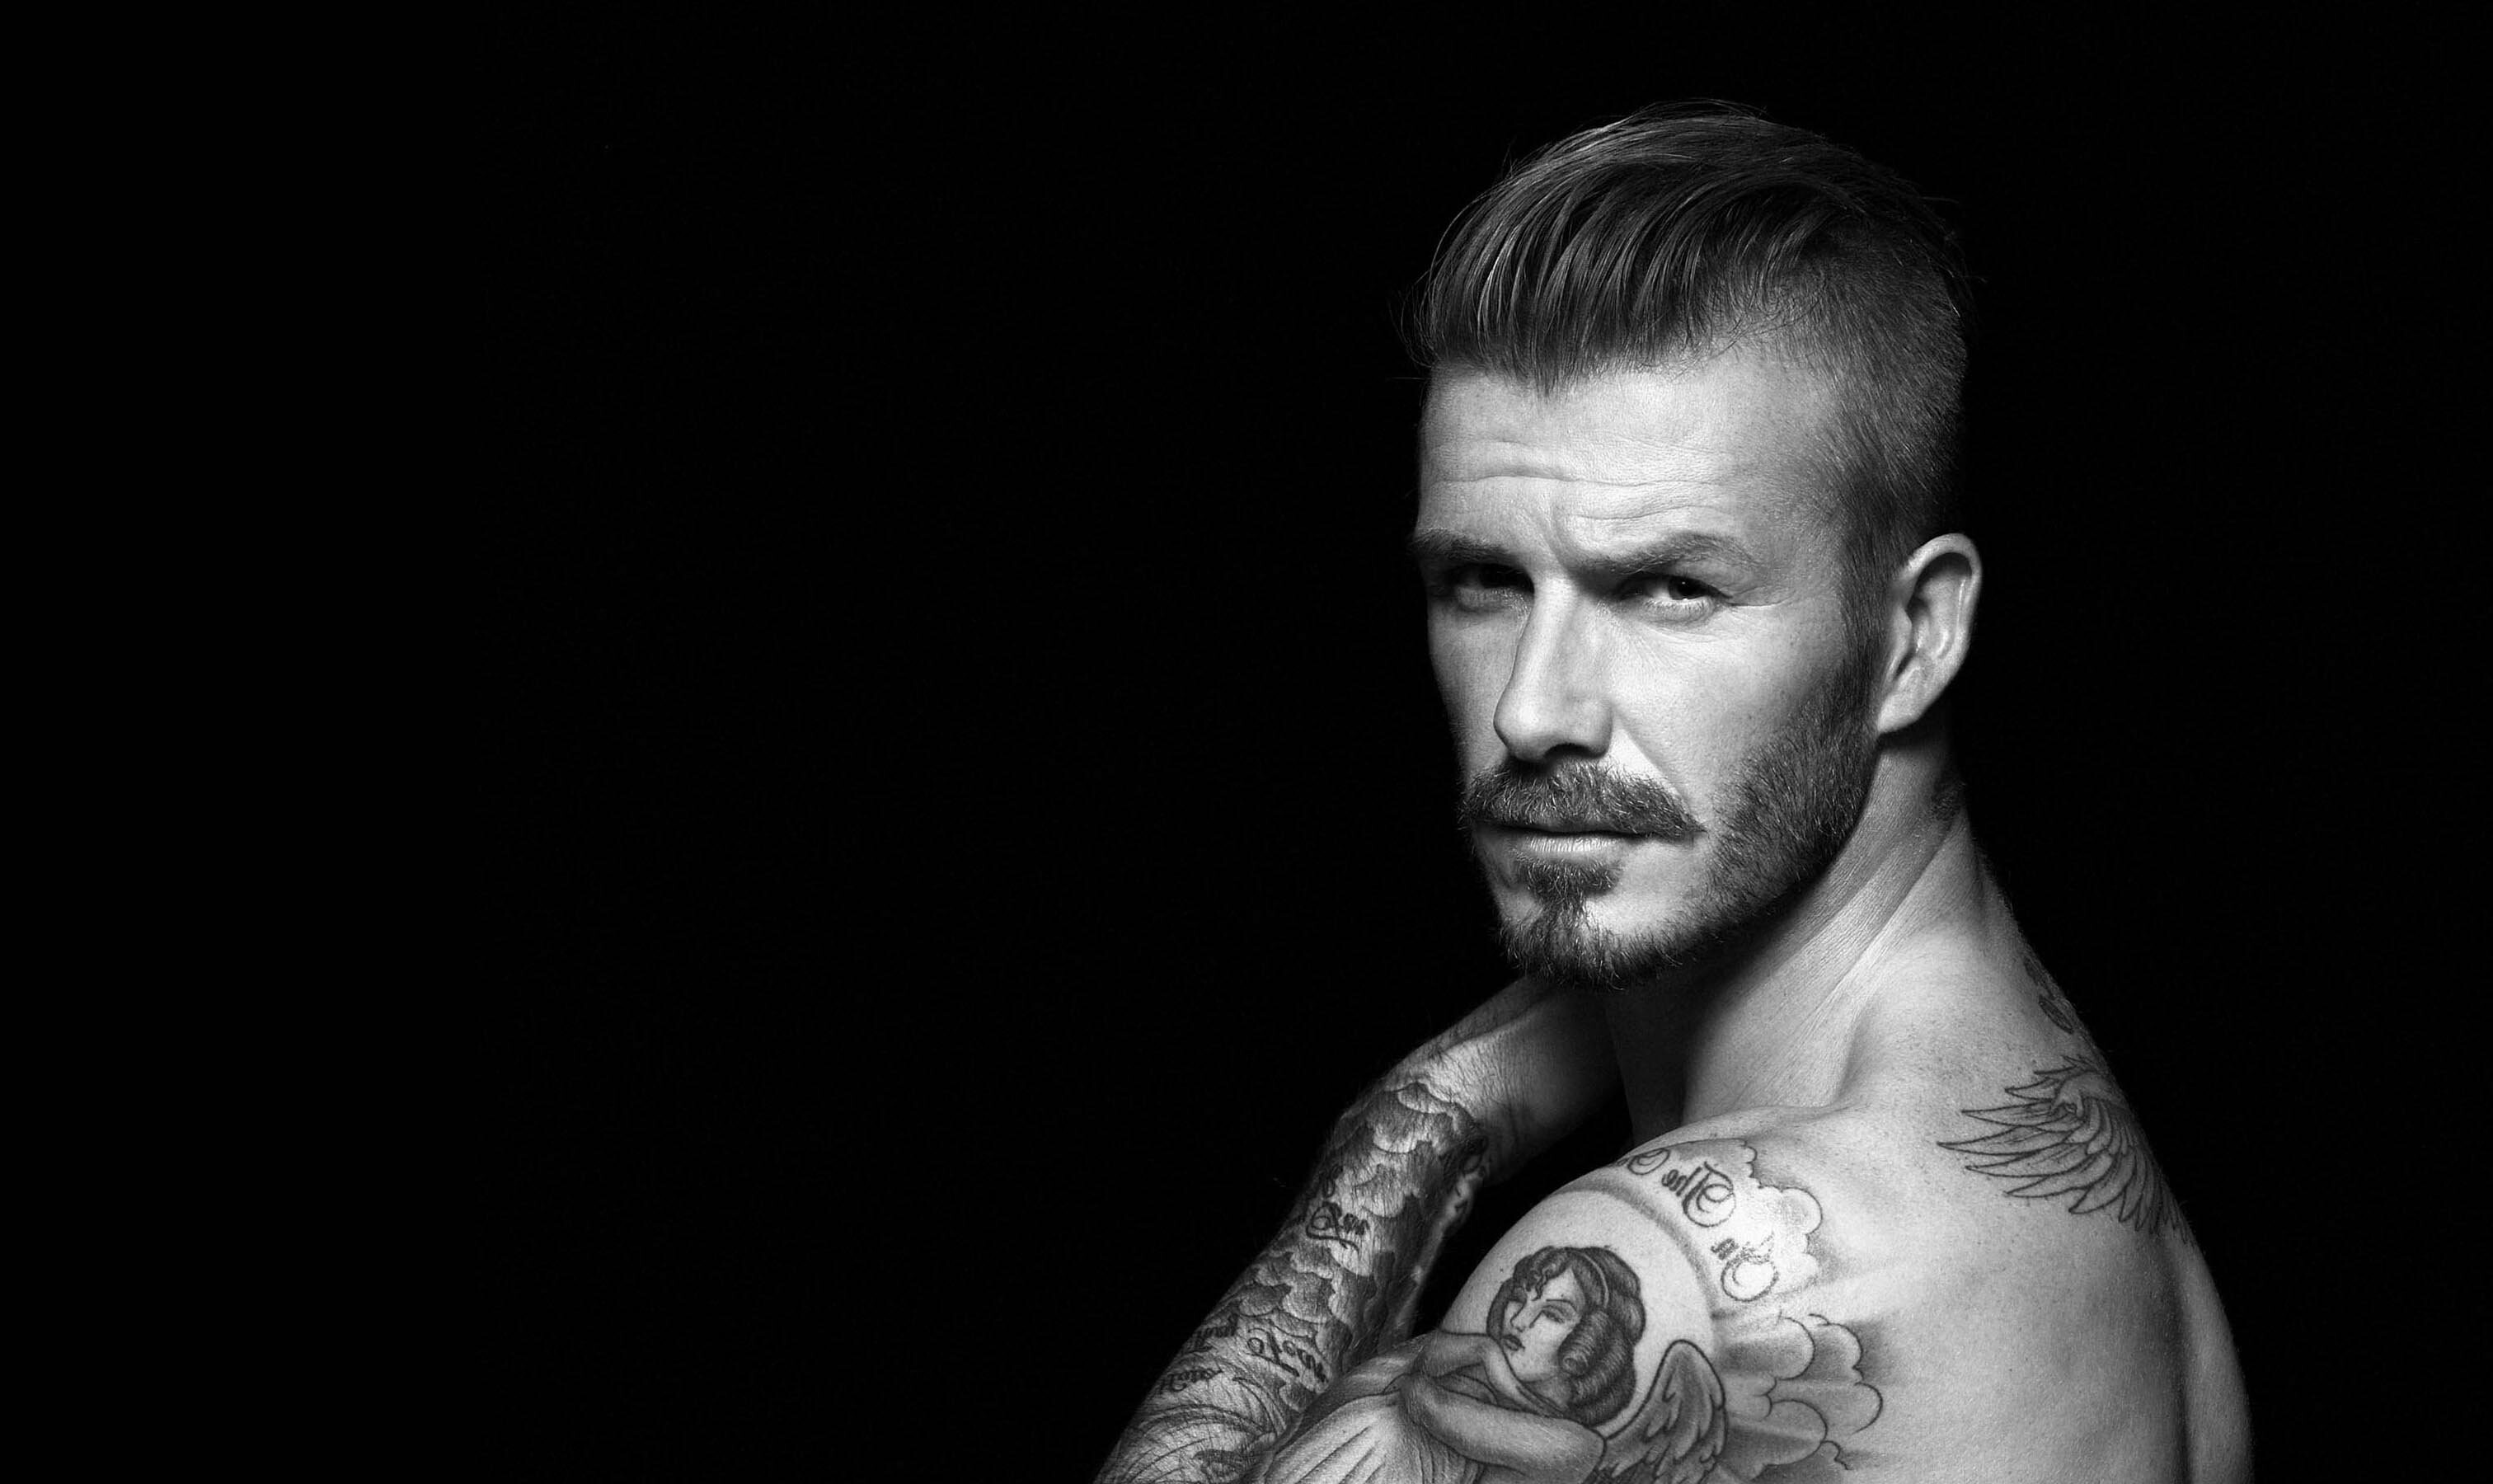 David Beckham: Signed a five-year contract with Major League Soccer club LA Galaxy in July 2007. 3030x1800 HD Wallpaper.